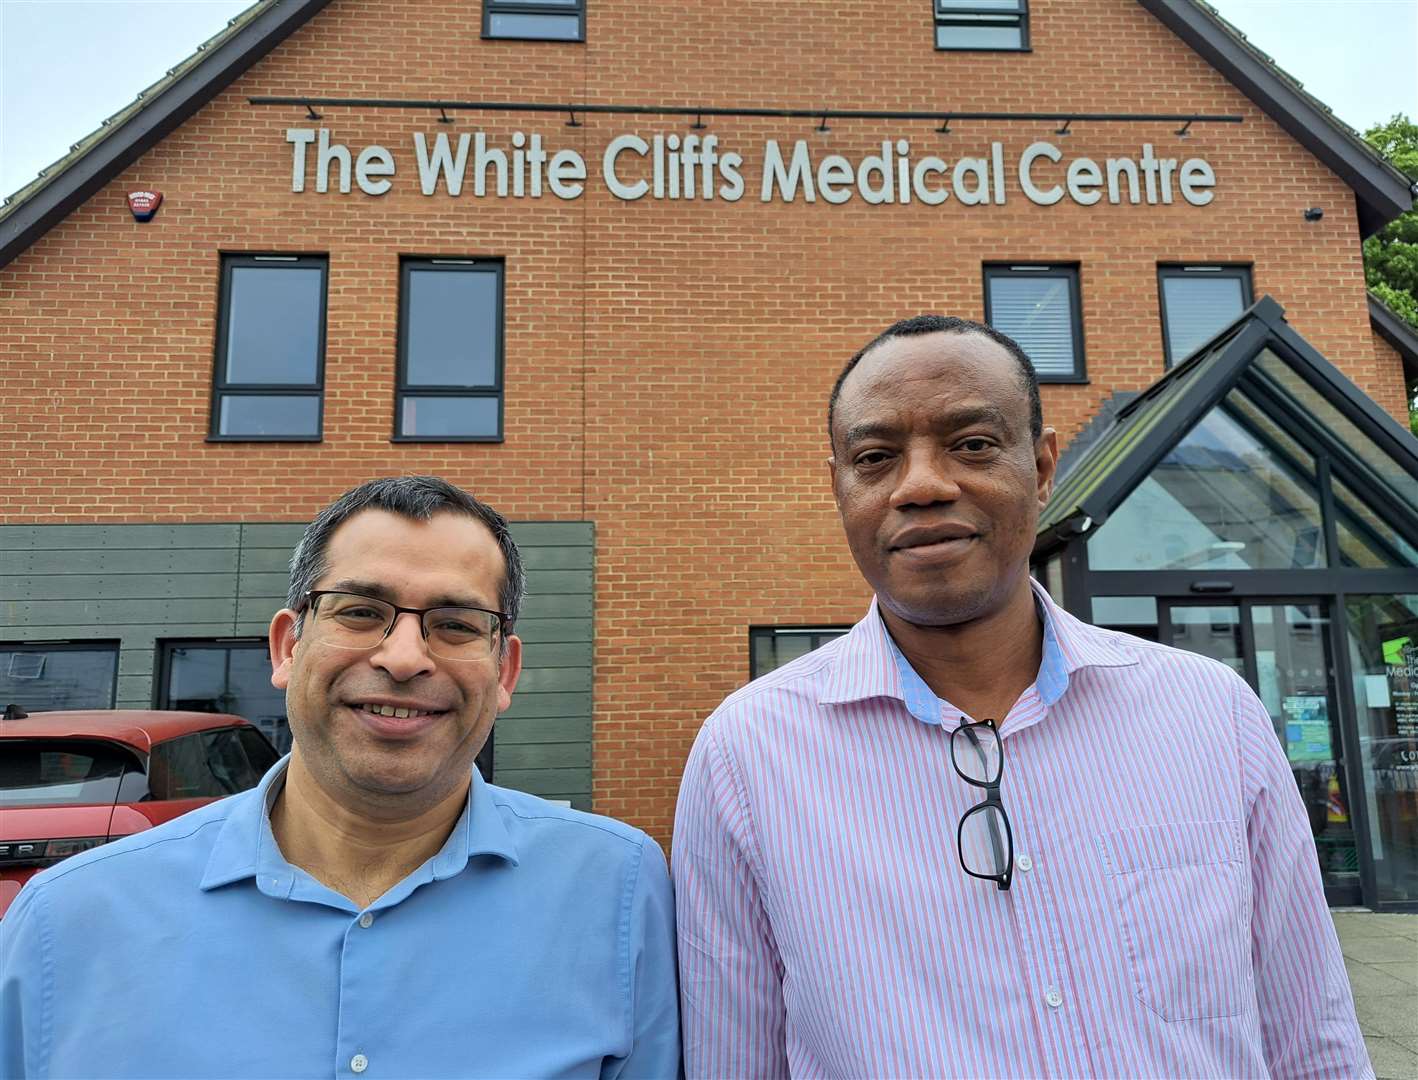 Two of the doctors at the White Cliffs Medical Centre in Folkestone Road, Pankaj Jain, left, an Abiola Idowu